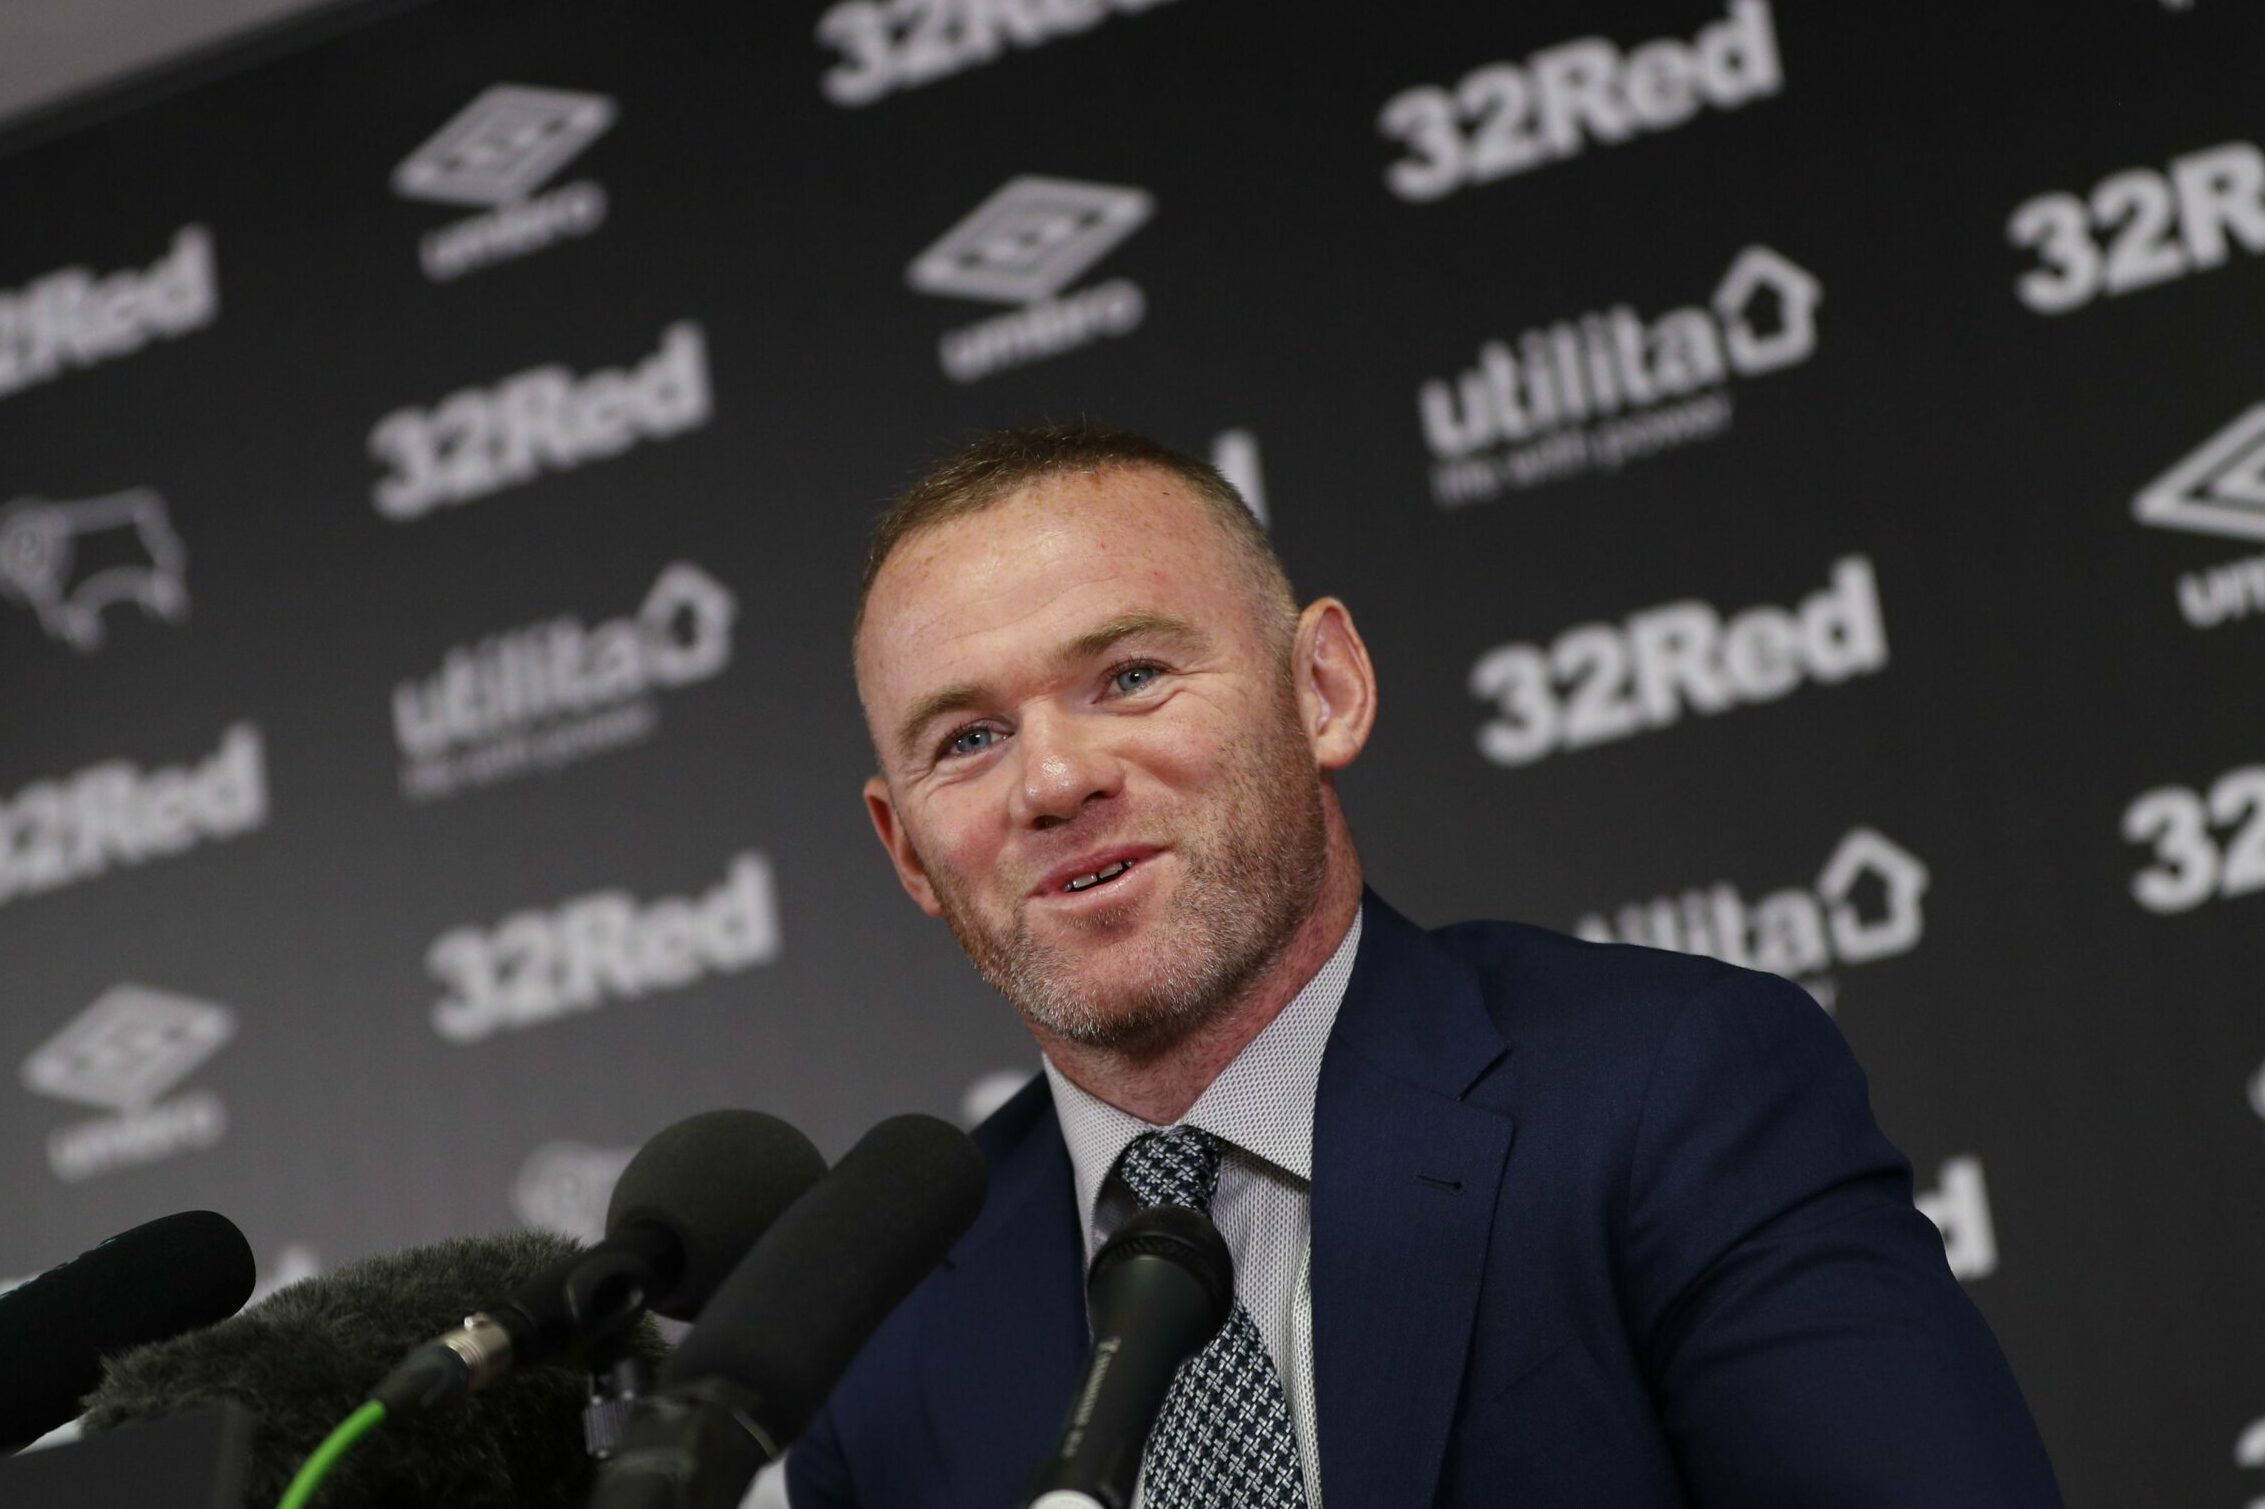 Wayne Rooney takes up coaching duties as Derby County manager